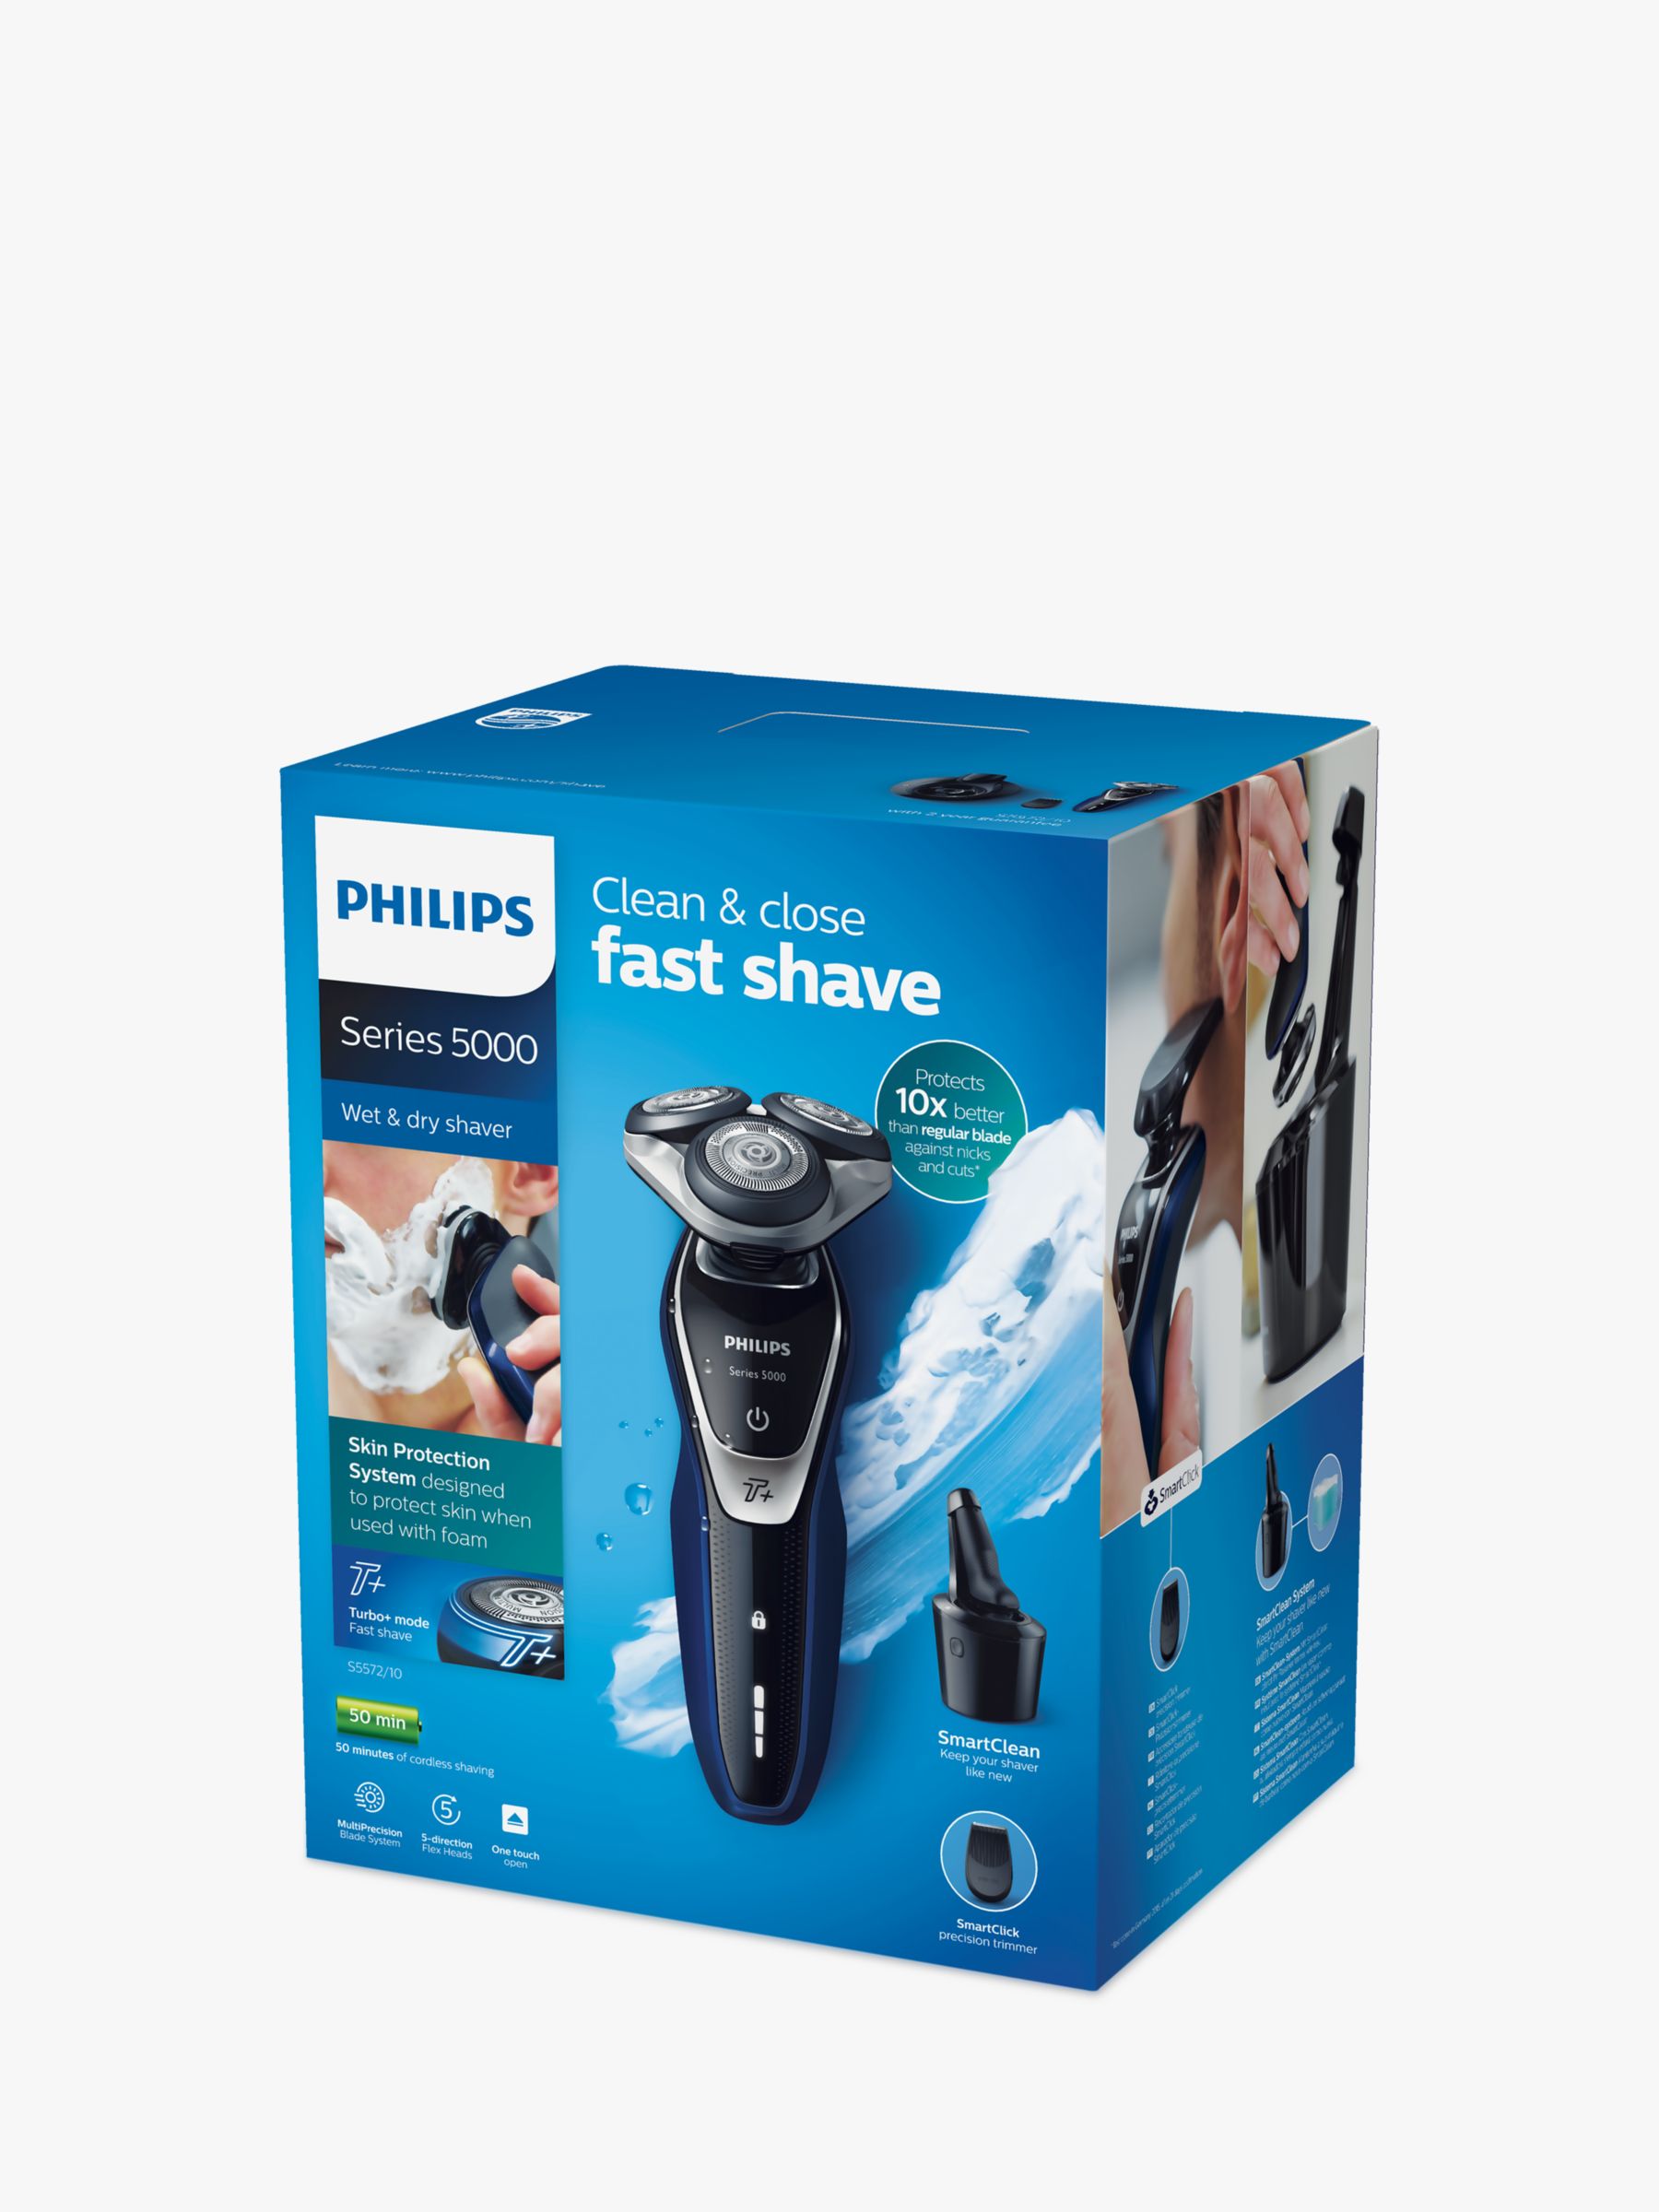 philips fast shave series 5000